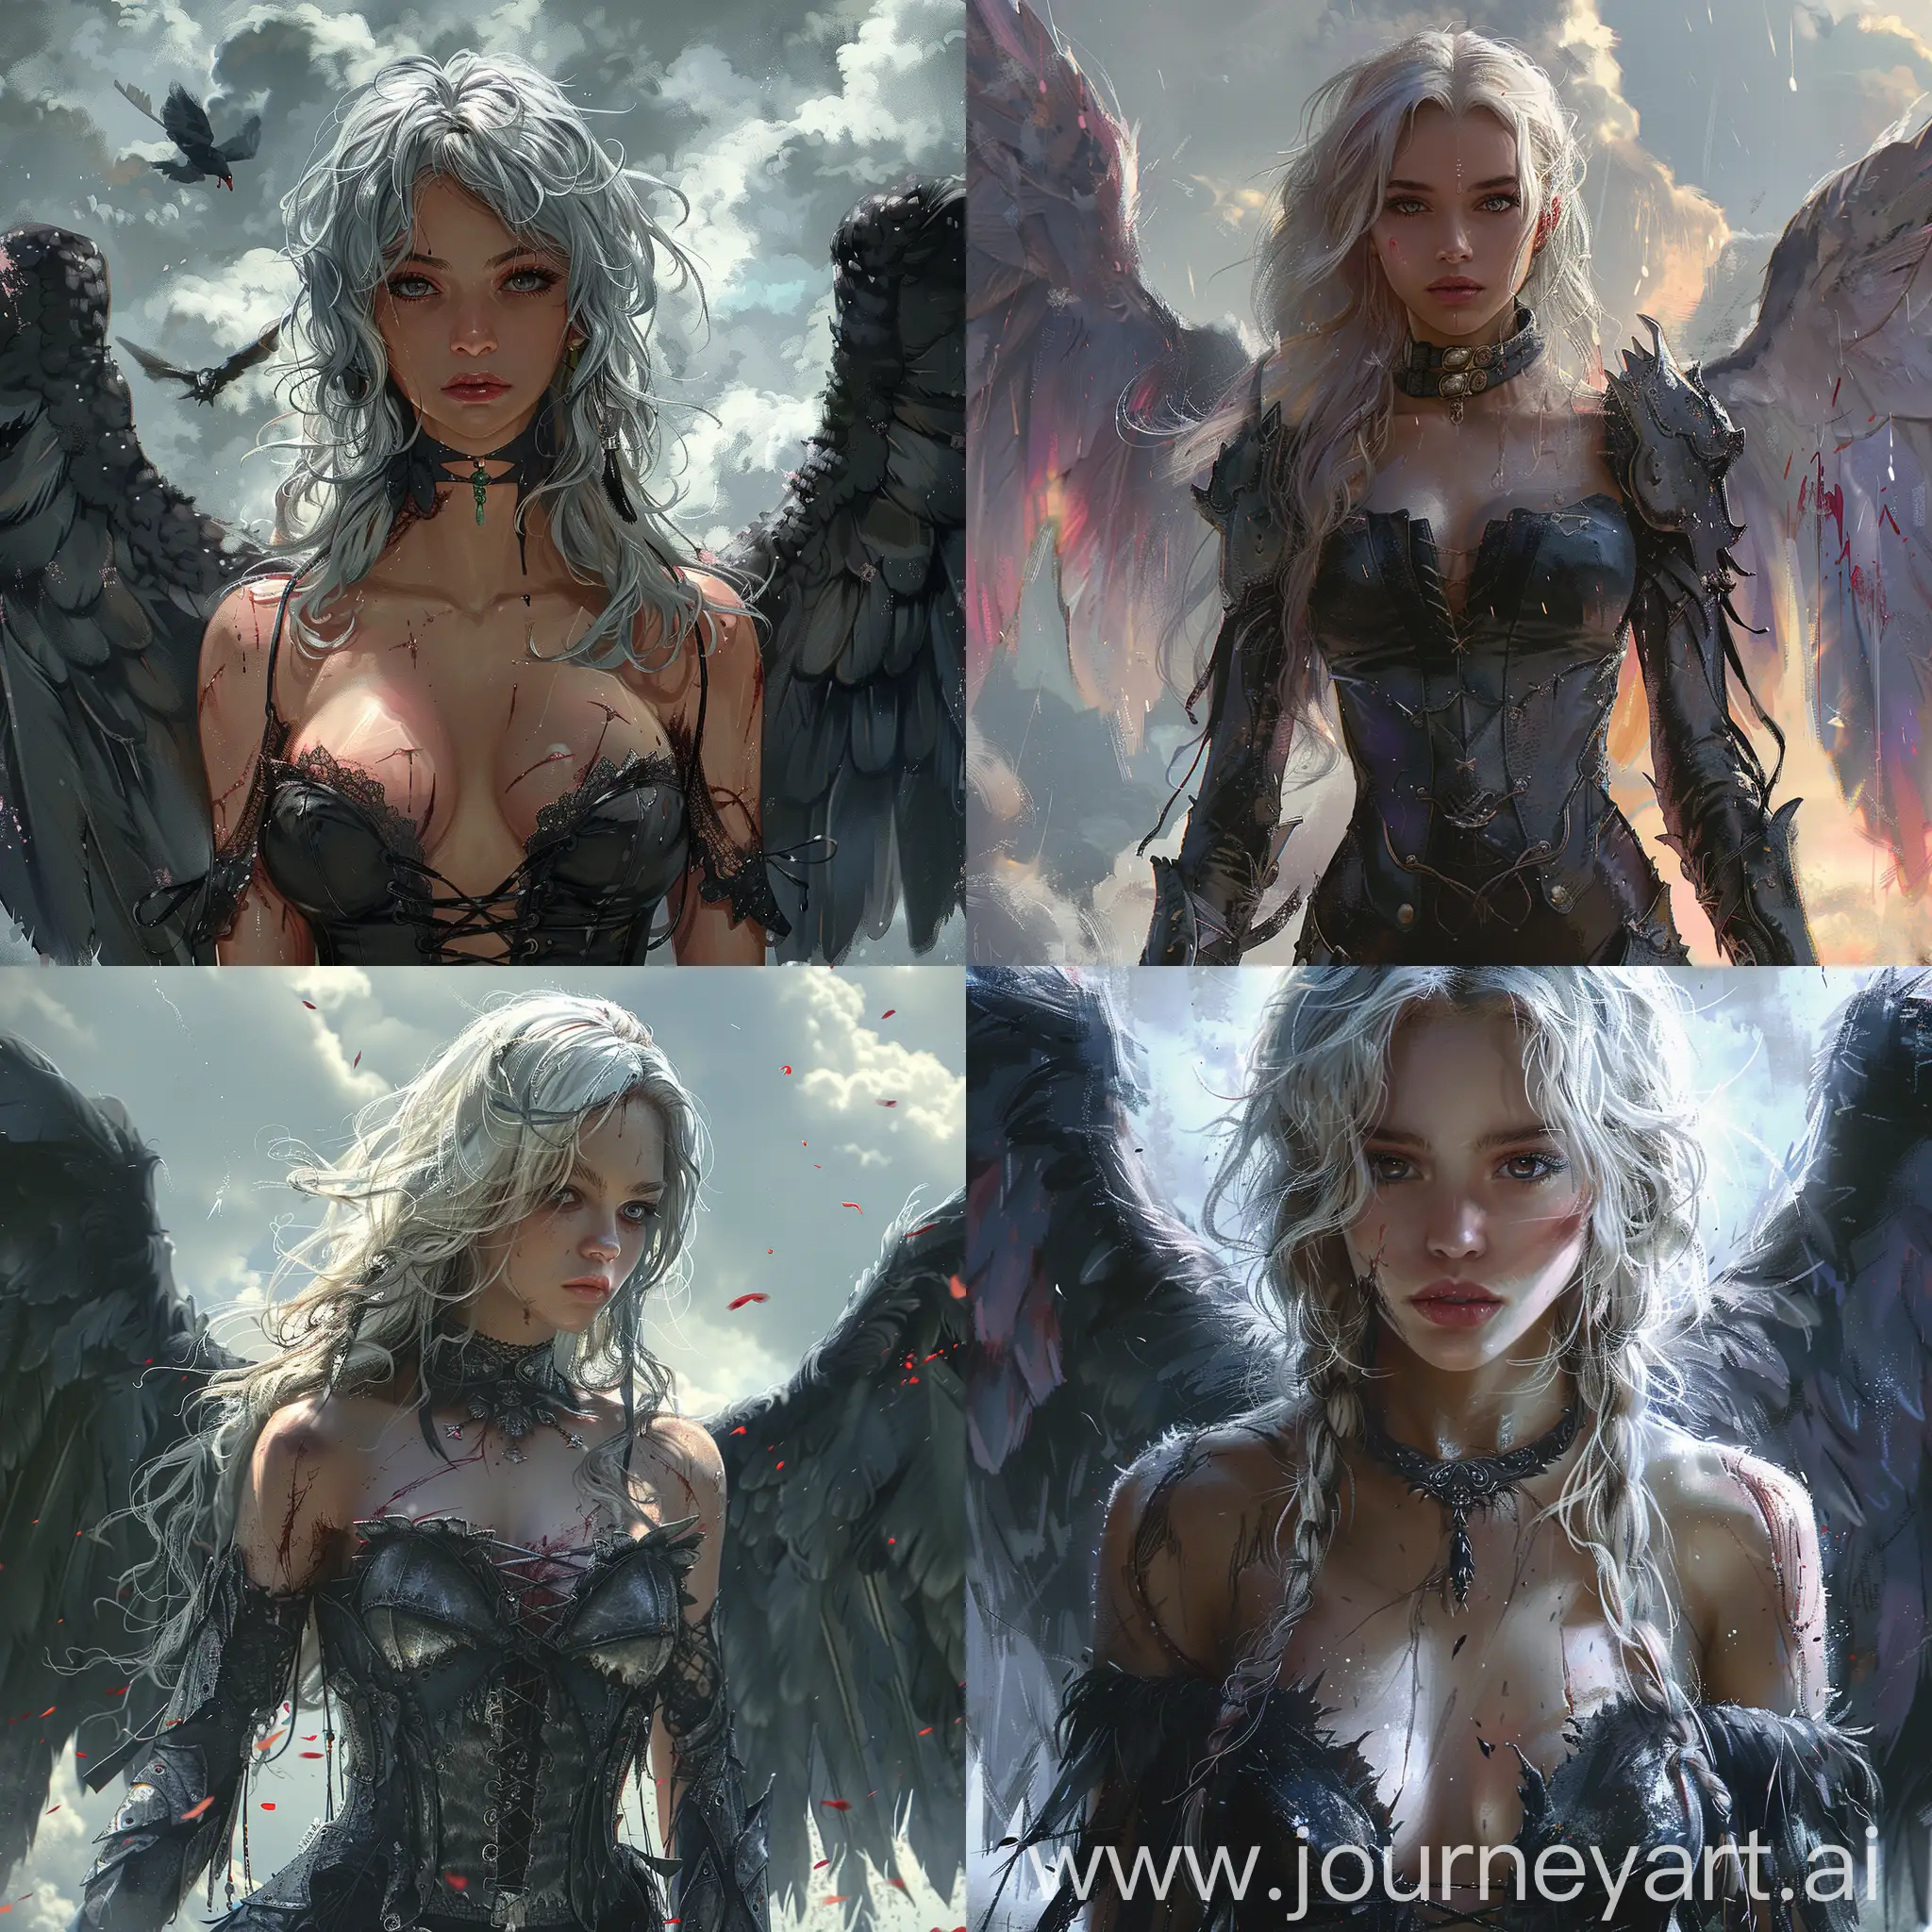 Anime::1.3 female dark angel with large tattered black wings, standing in front of a cloudy sky background with gray and purple hues, the angel has long white hair, violet eyes and is wearing a black leather tunic, the wings are spread out and there are red paint drips trailing from them, --s 500